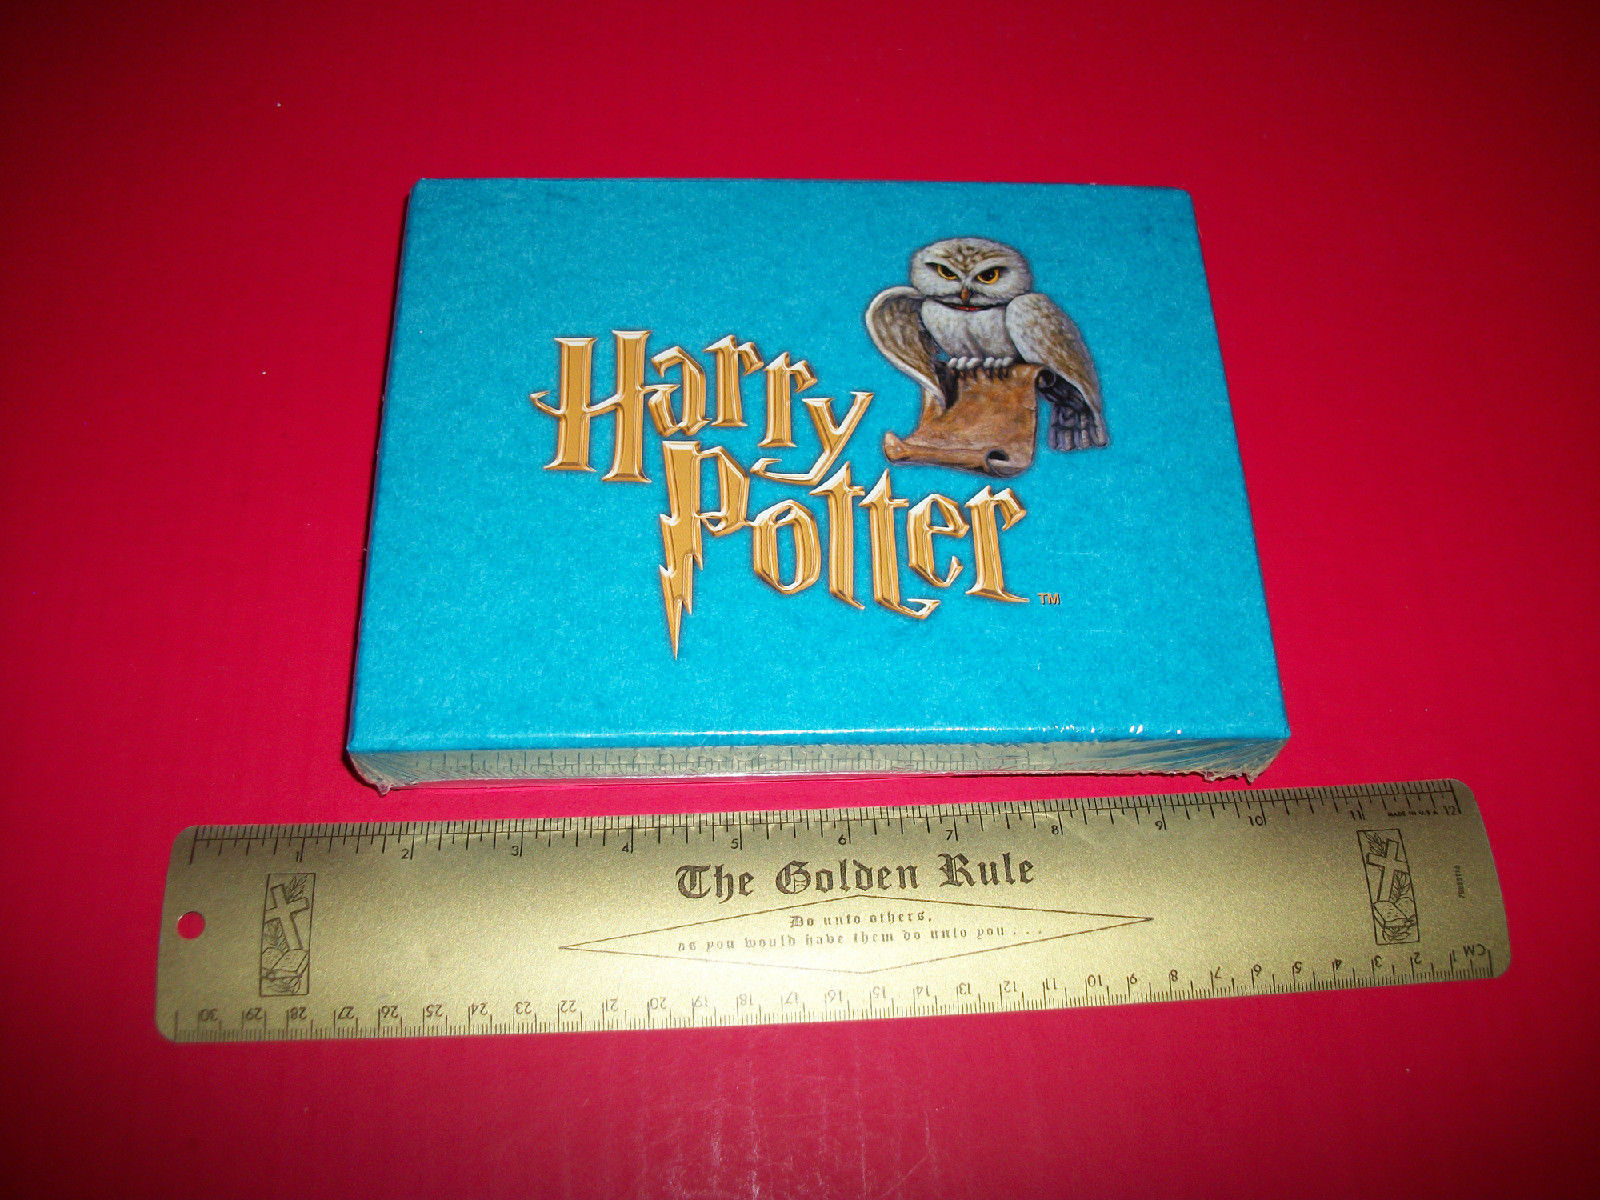 Harry Potter Box - include a book as well as items that go with